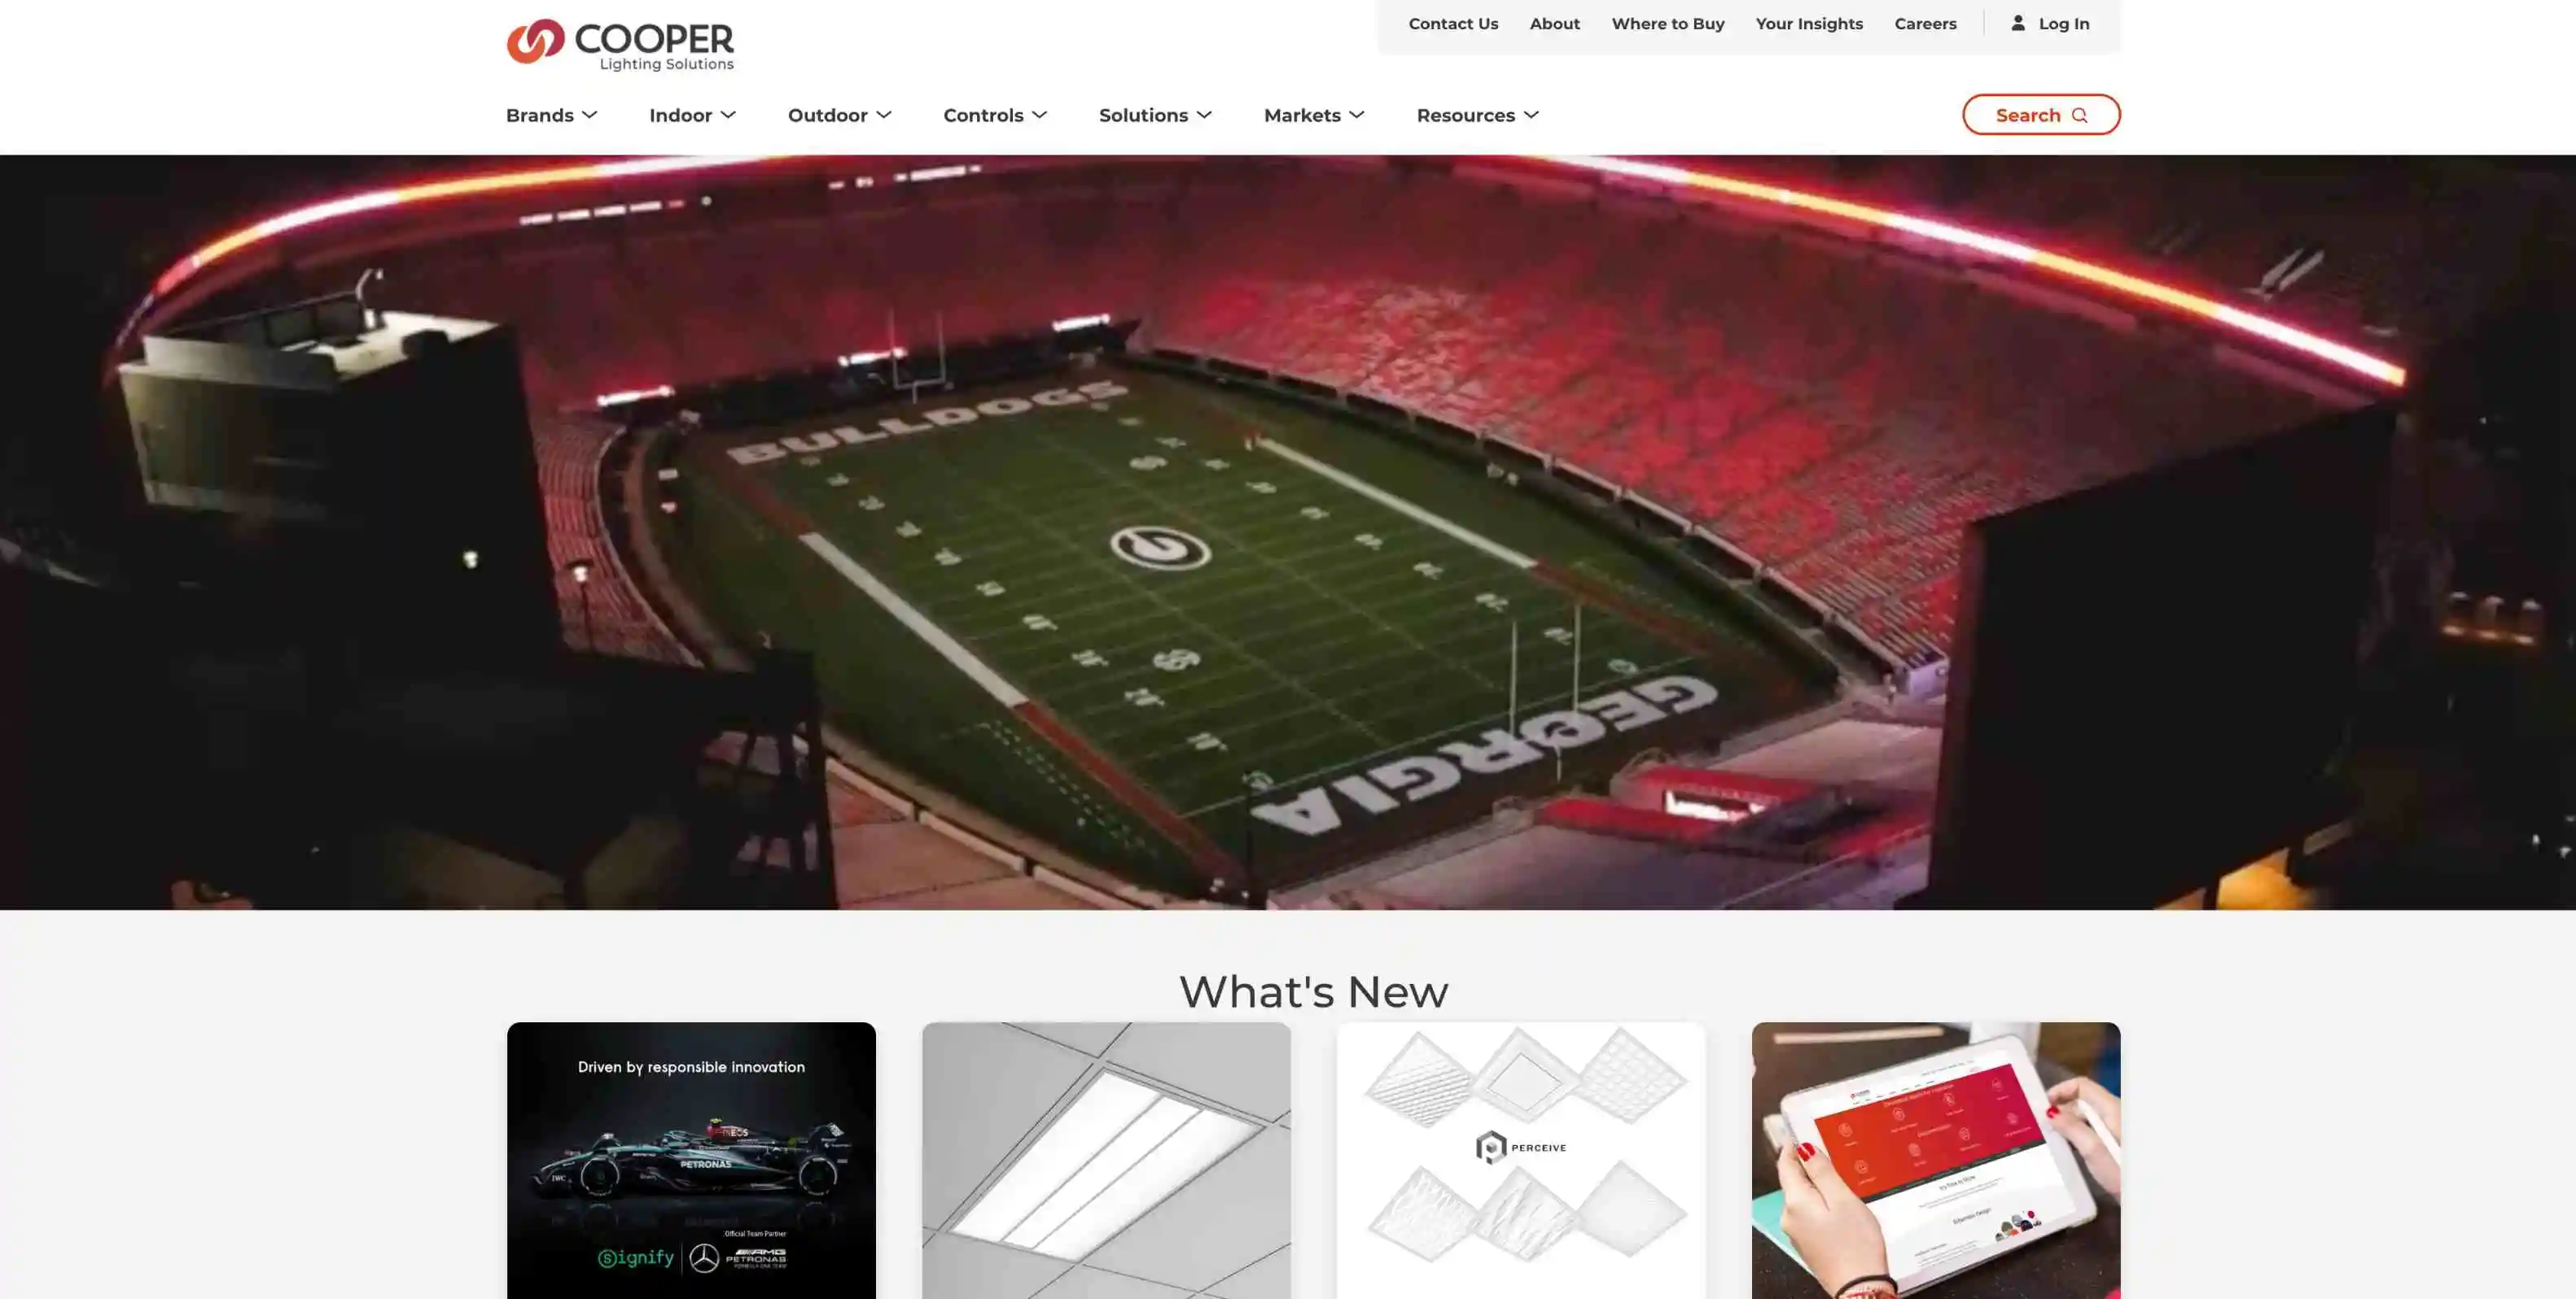 The website for a football stadium with Cooper Lighting company